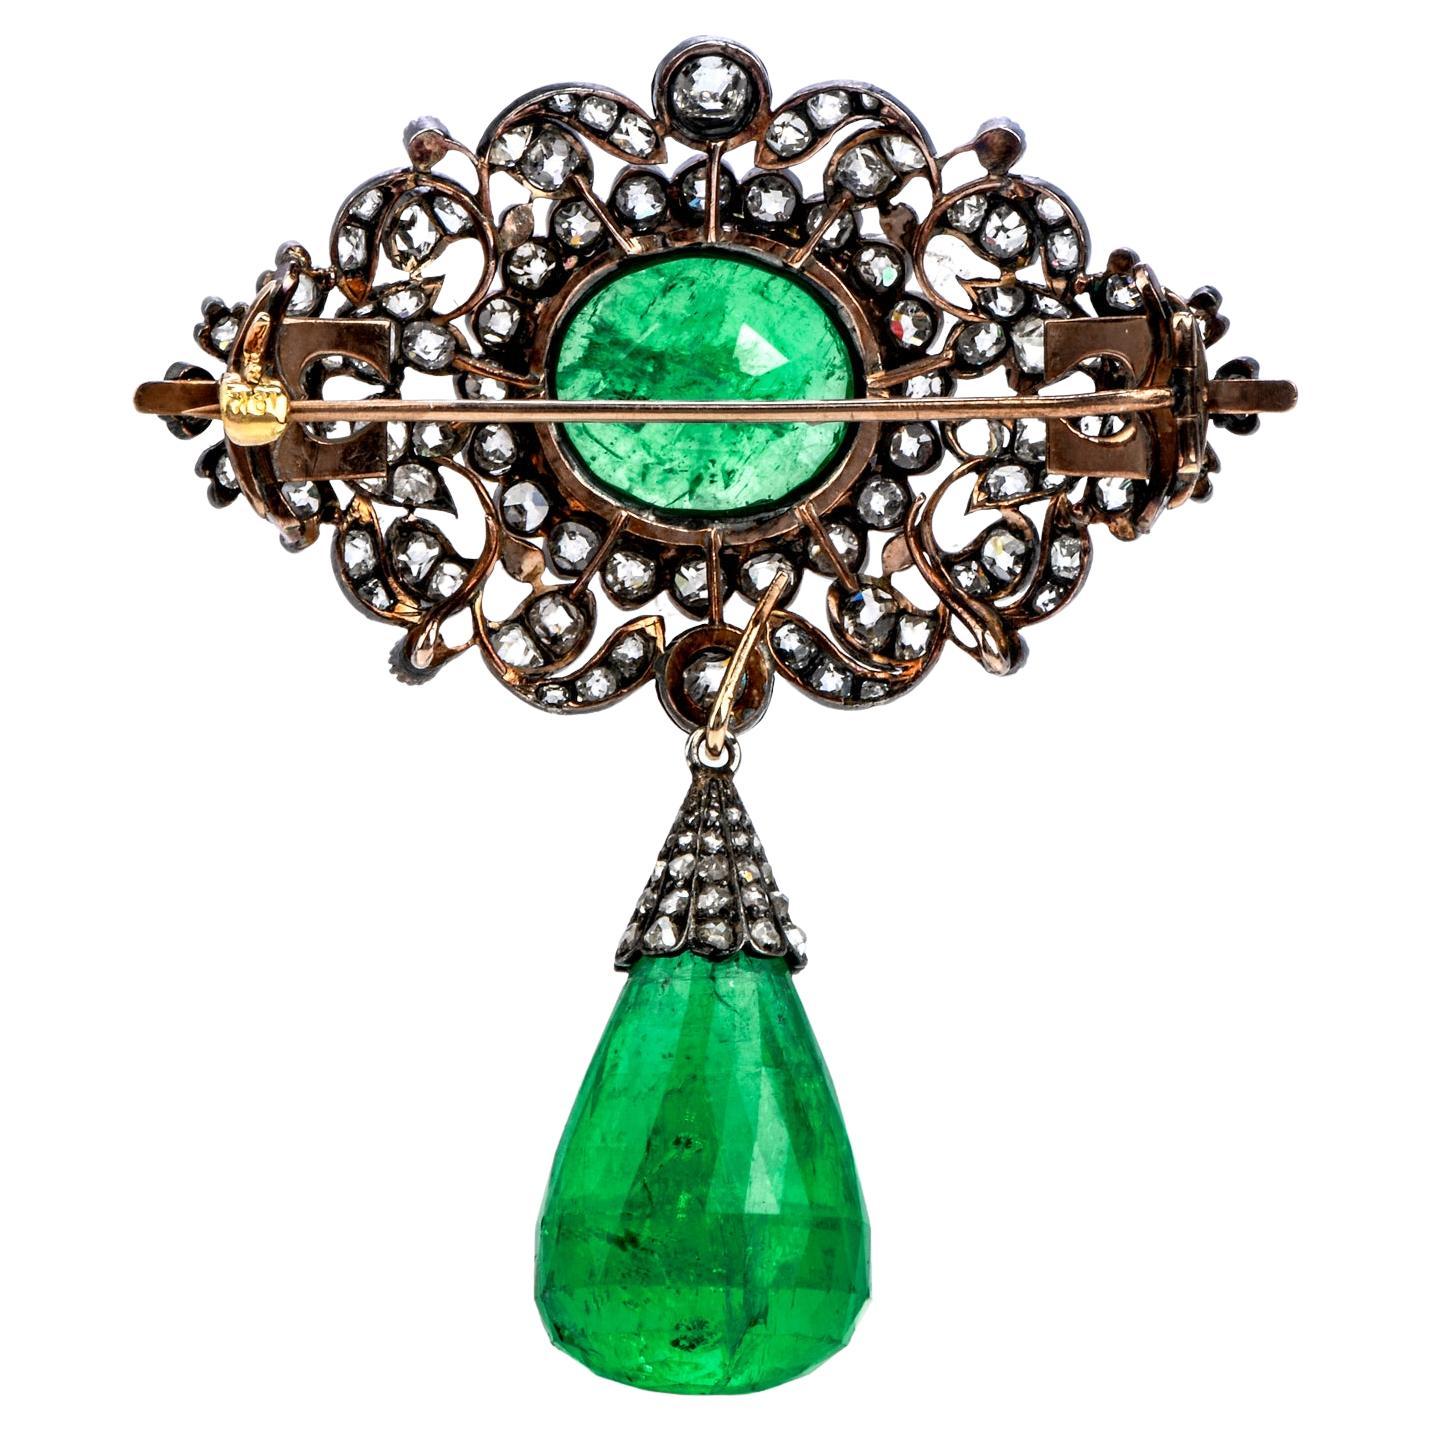 his antique Georgian Emerald Diamond Silver and Gold pendant is masterfully crafted in silver and gold, weighing 17.6 grams and measuring 47mm wide and 57 mm long.

This stunning and rare antique pendant is centered with a large oval-shaped genuine